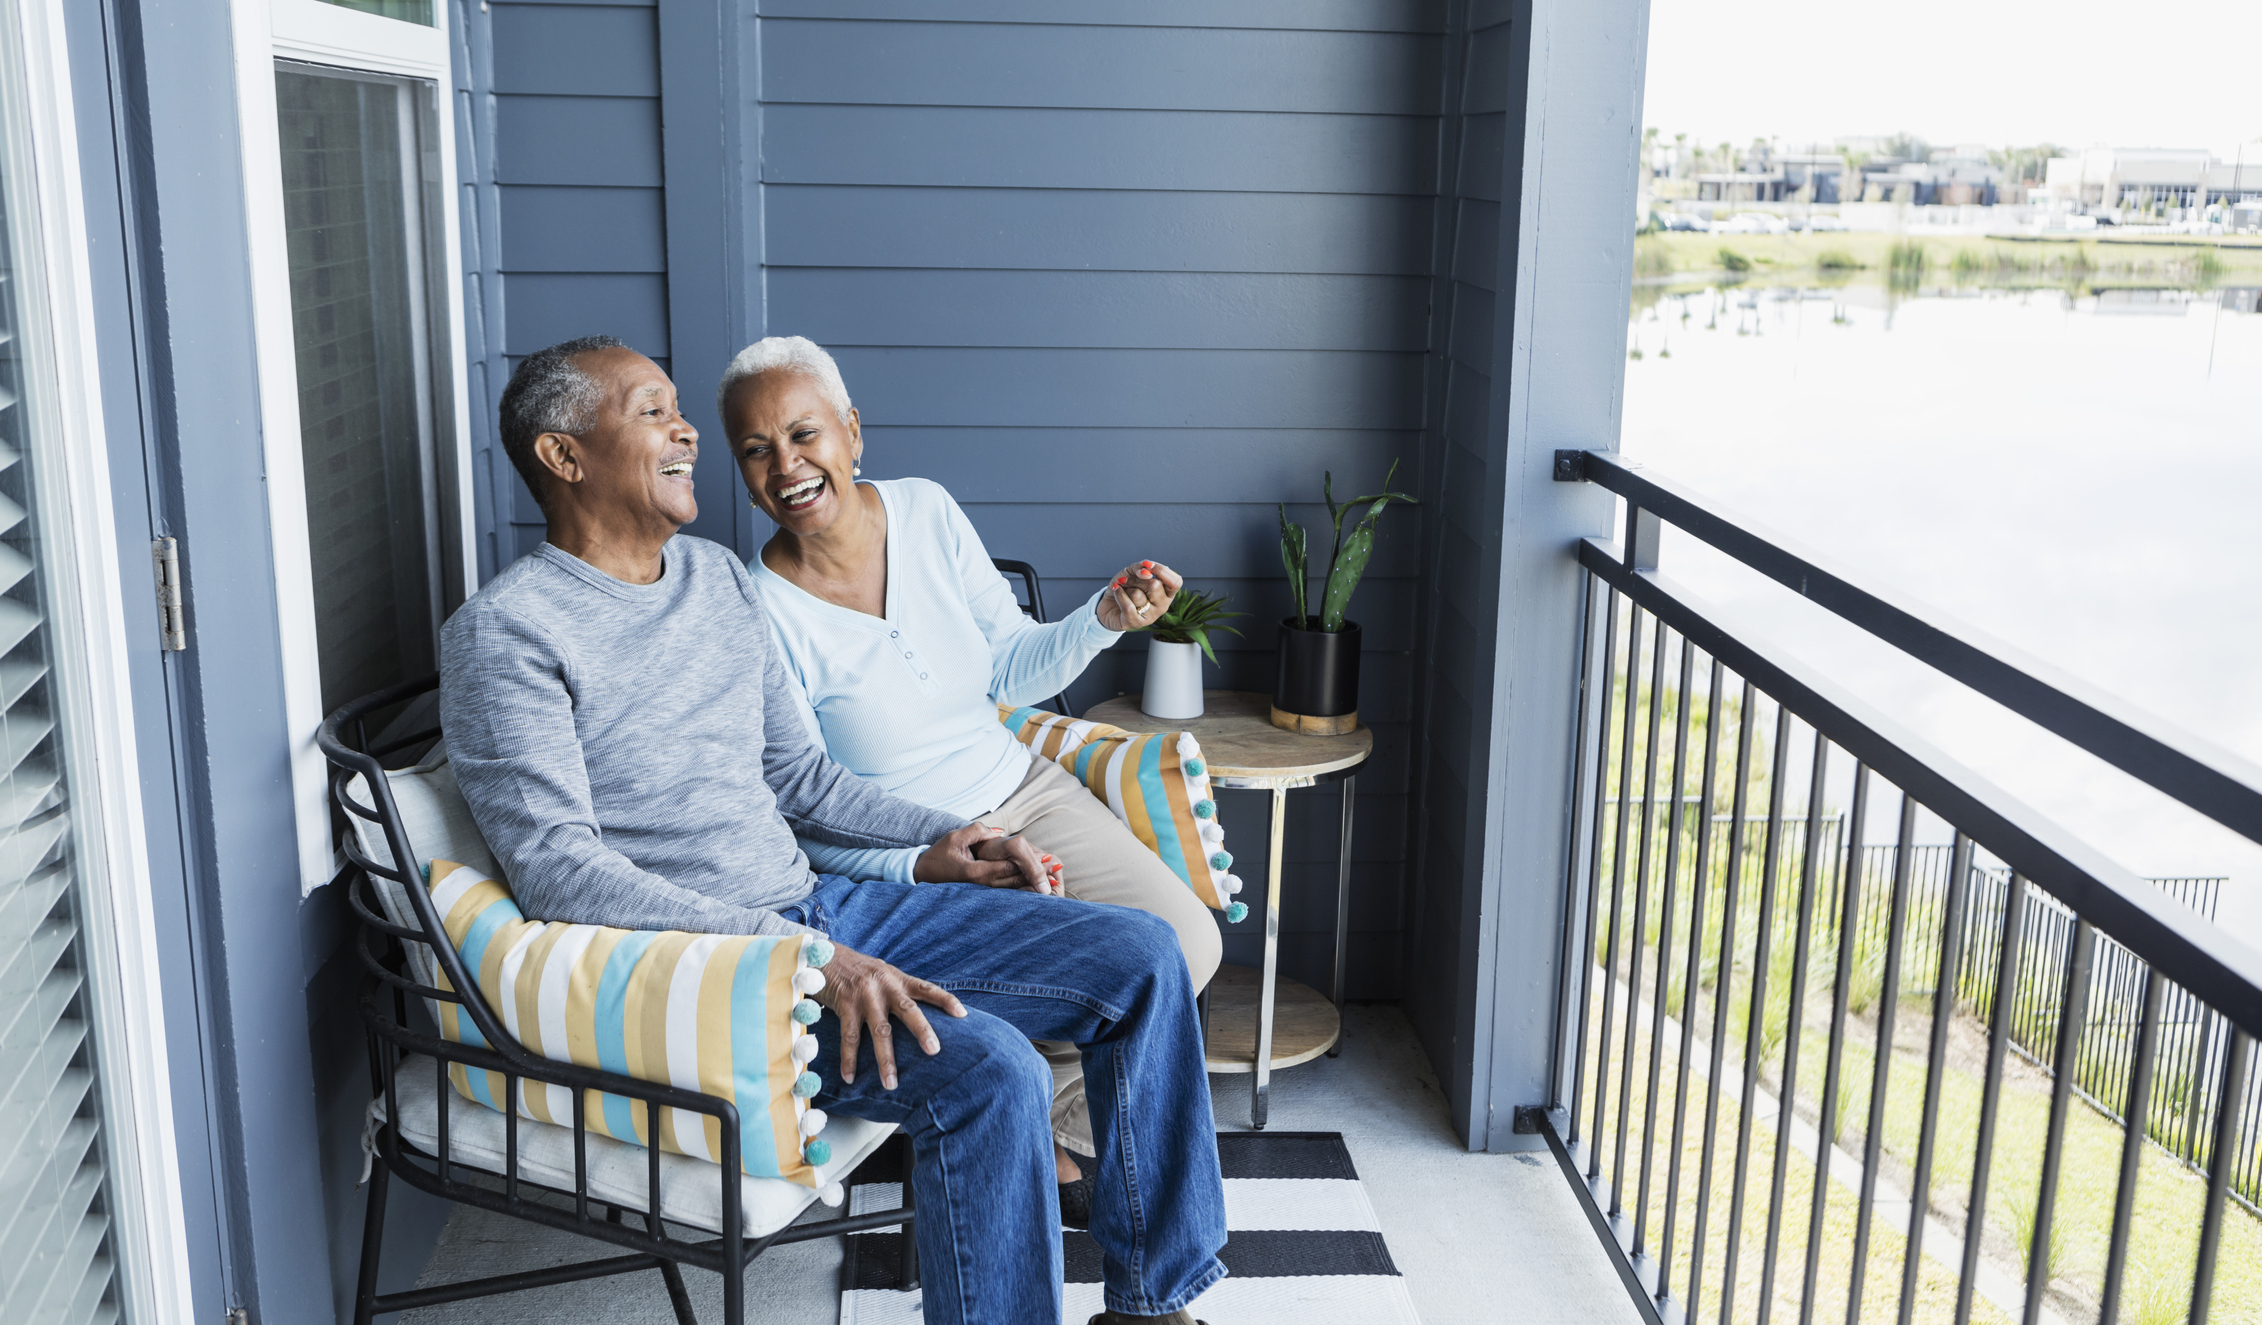 6 Tips To Decorate Your Apartment Balcony On A Budget - Southern Management